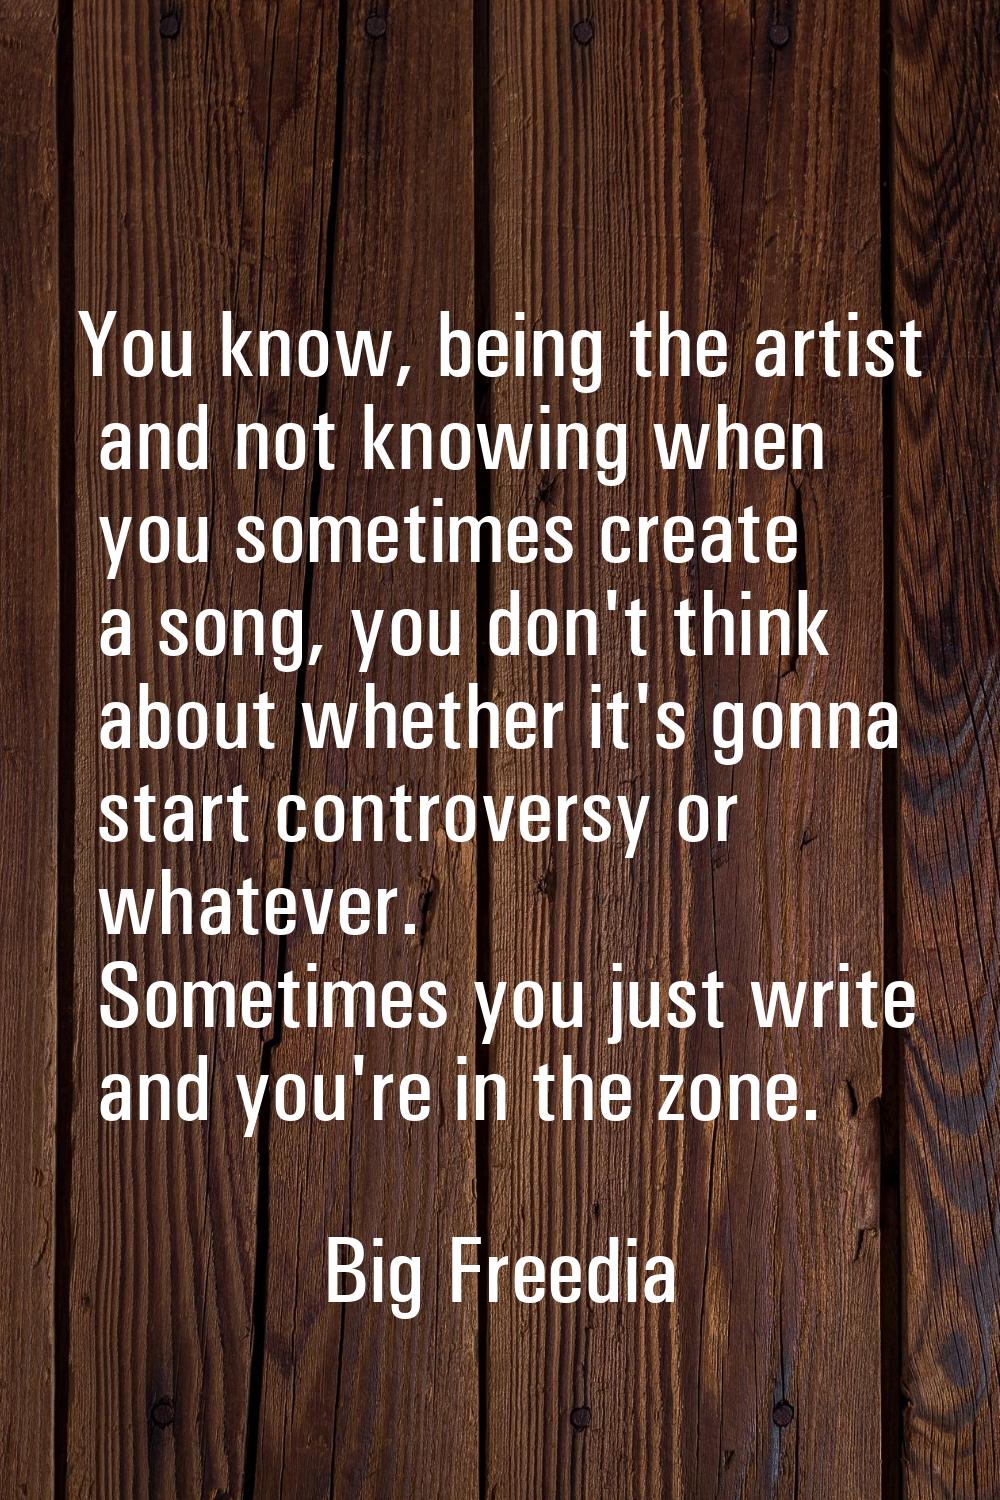 You know, being the artist and not knowing when you sometimes create a song, you don't think about 